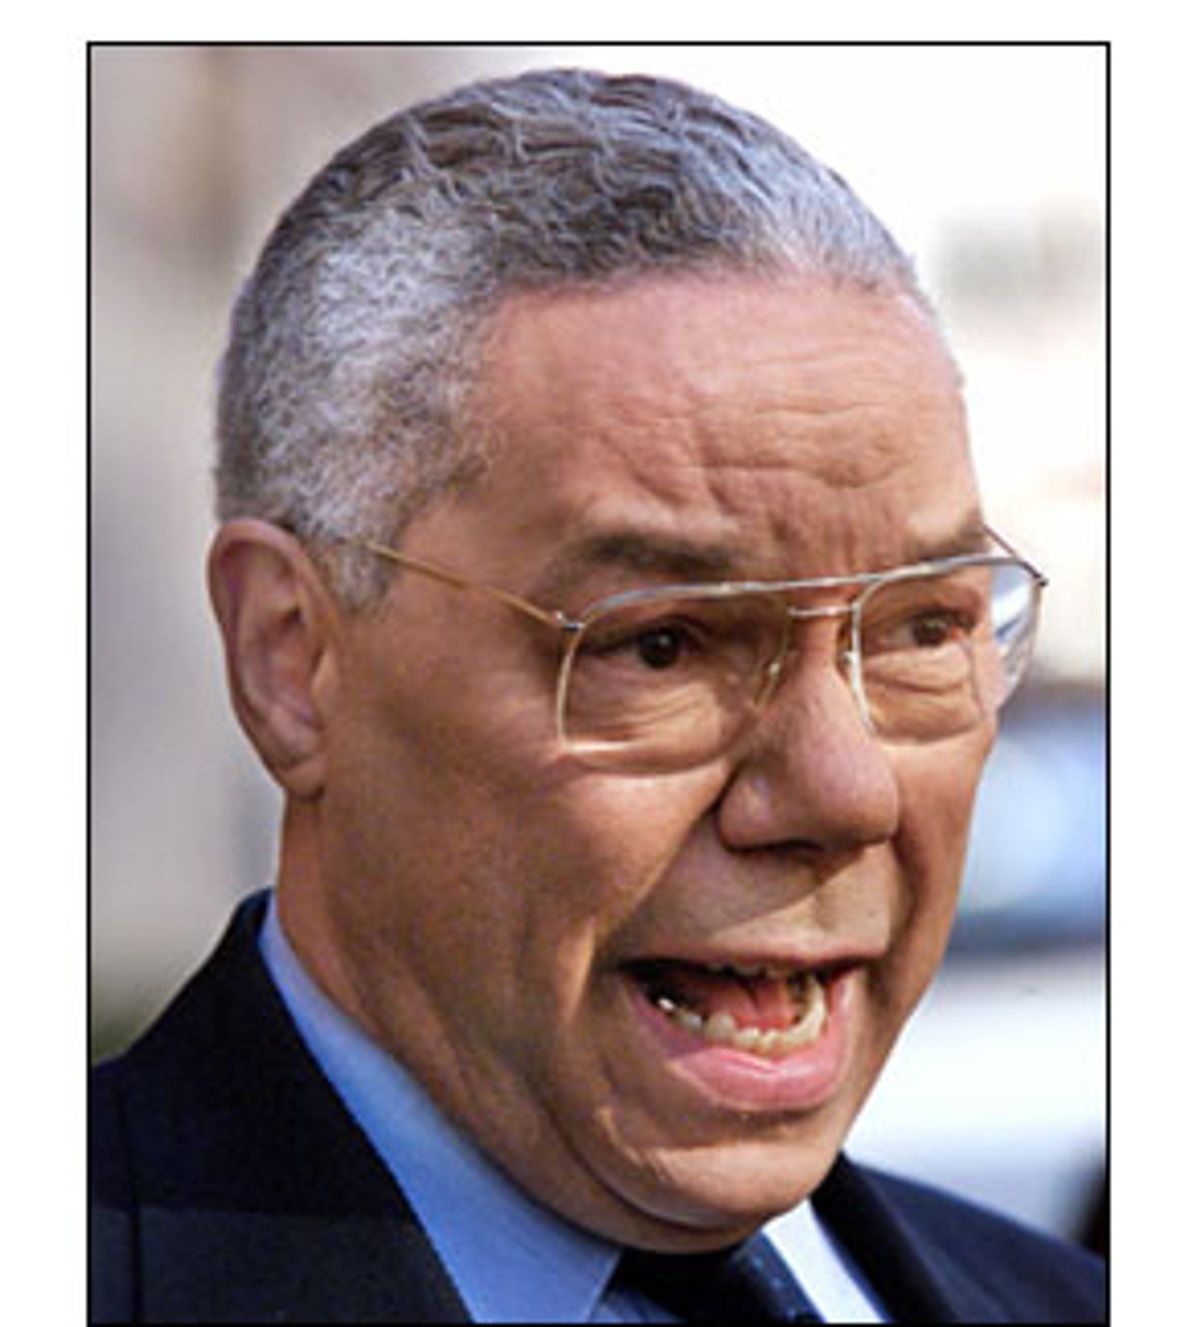 Secretary of State Colin Powell talks to journalists after being interviewed on CBS's "Face the Nation" in Washington Sunday, Feb. 11, 2001. Powell spoke about his upcoming trip to the Middle East, his first trip, and said he will stop in Syria for a few hours, as Syria is an "important player" in the process. (AP Photo/Rick Bowmer) (Associated Press)